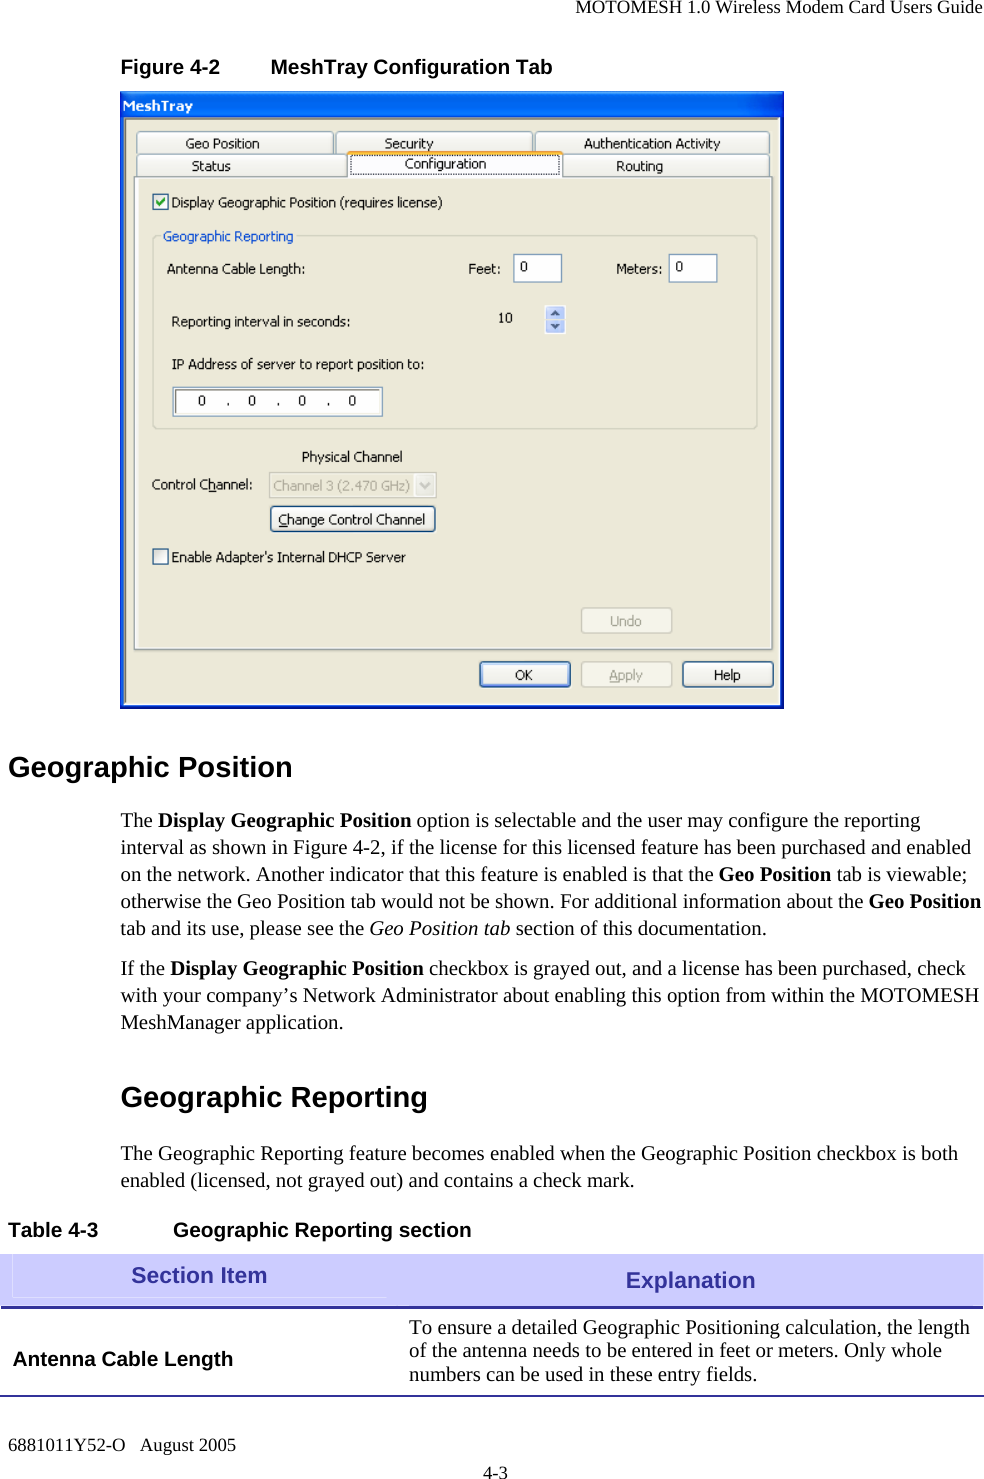 MOTOMESH 1.0 Wireless Modem Card Users Guide 6881011Y52-O   August 2005 4-3 Figure 4-2  MeshTray Configuration Tab  Geographic Position The Display Geographic Position option is selectable and the user may configure the reporting interval as shown in Figure 4-2, if the license for this licensed feature has been purchased and enabled on the network. Another indicator that this feature is enabled is that the Geo Position tab is viewable; otherwise the Geo Position tab would not be shown. For additional information about the Geo Position tab and its use, please see the Geo Position tab section of this documentation. If the Display Geographic Position checkbox is grayed out, and a license has been purchased, check with your company’s Network Administrator about enabling this option from within the MOTOMESH MeshManager application. Geographic Reporting The Geographic Reporting feature becomes enabled when the Geographic Position checkbox is both enabled (licensed, not grayed out) and contains a check mark.    Table 4-3  Geographic Reporting section Section Item  Explanation  Antenna Cable Length To ensure a detailed Geographic Positioning calculation, the length of the antenna needs to be entered in feet or meters. Only whole numbers can be used in these entry fields.  